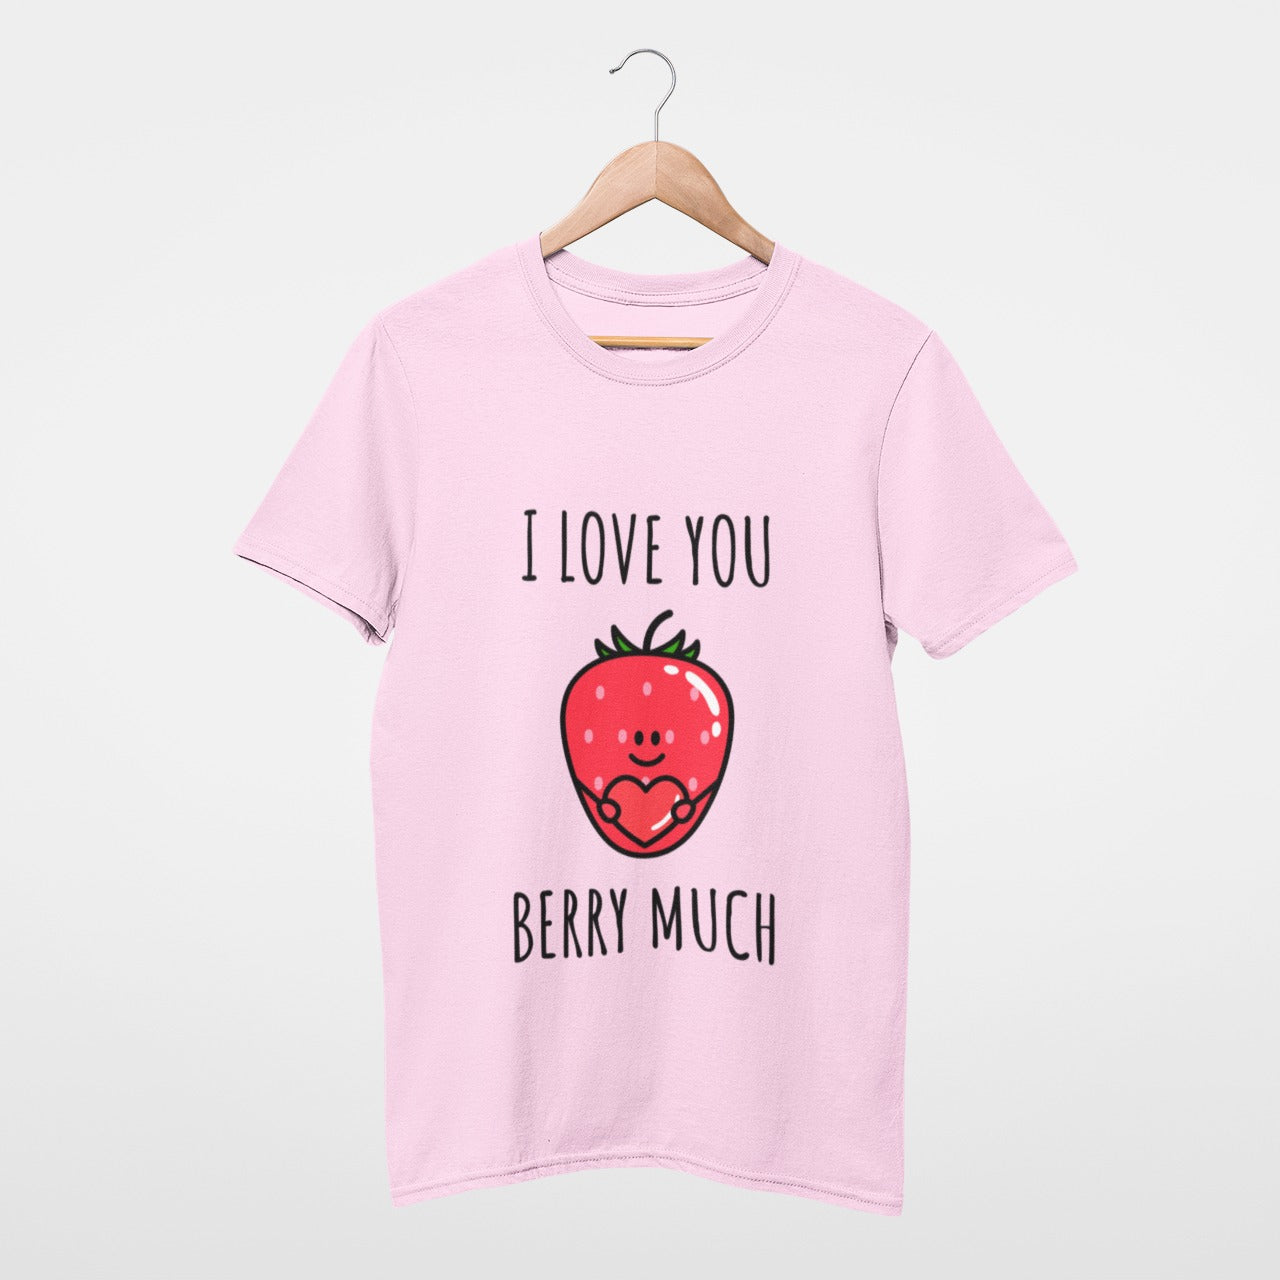 I love you very berry much Tee